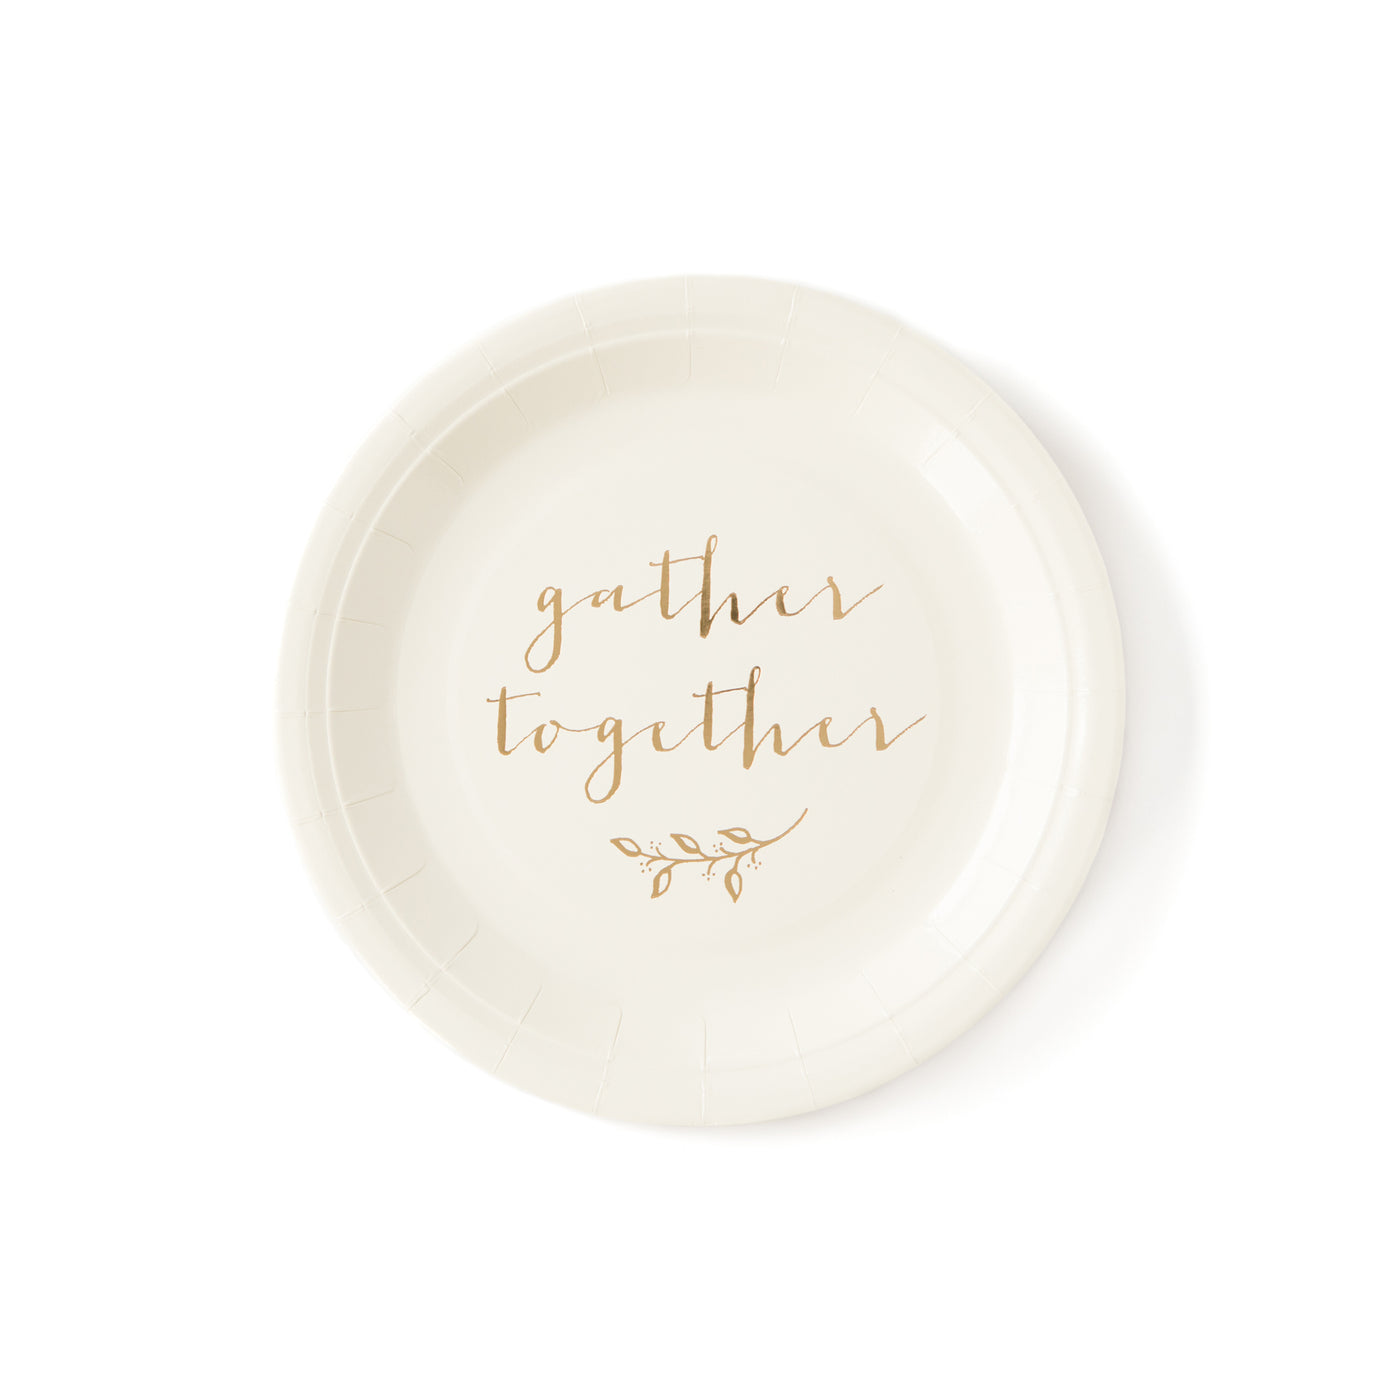 Gather Together 9" Plates - My Mind's Eye Paper Goods